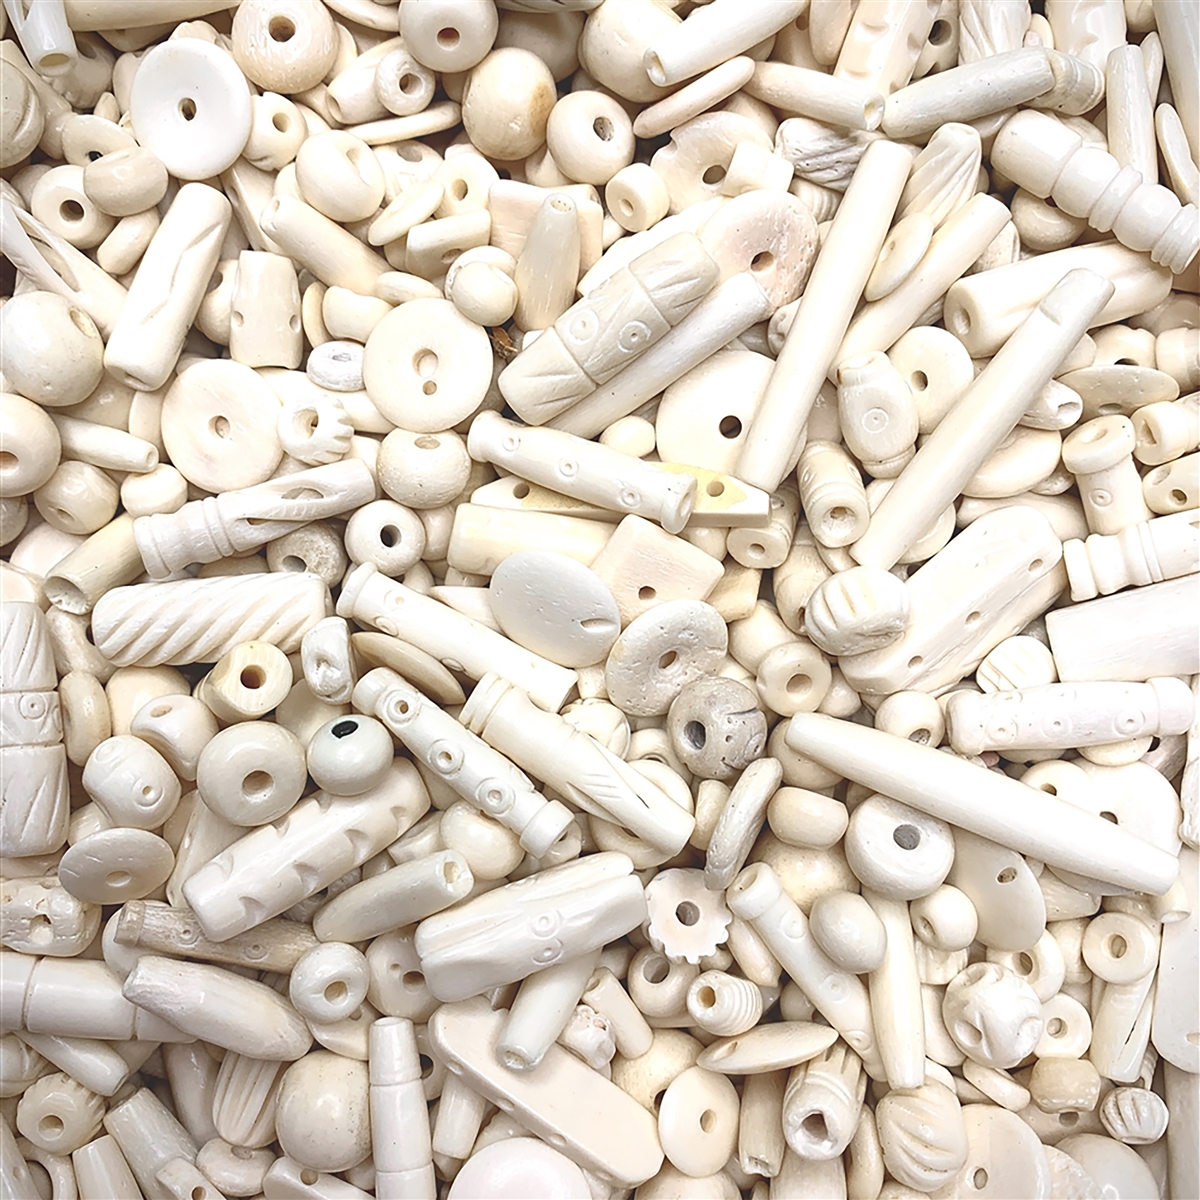 BD02425, carved bone beads, India, made in India, hand carved bone beads,  4mm bone beads, bovine, Indian bone beads, bleached bone, off white bone  beads, creamy white bone beads, tube beads, exotic